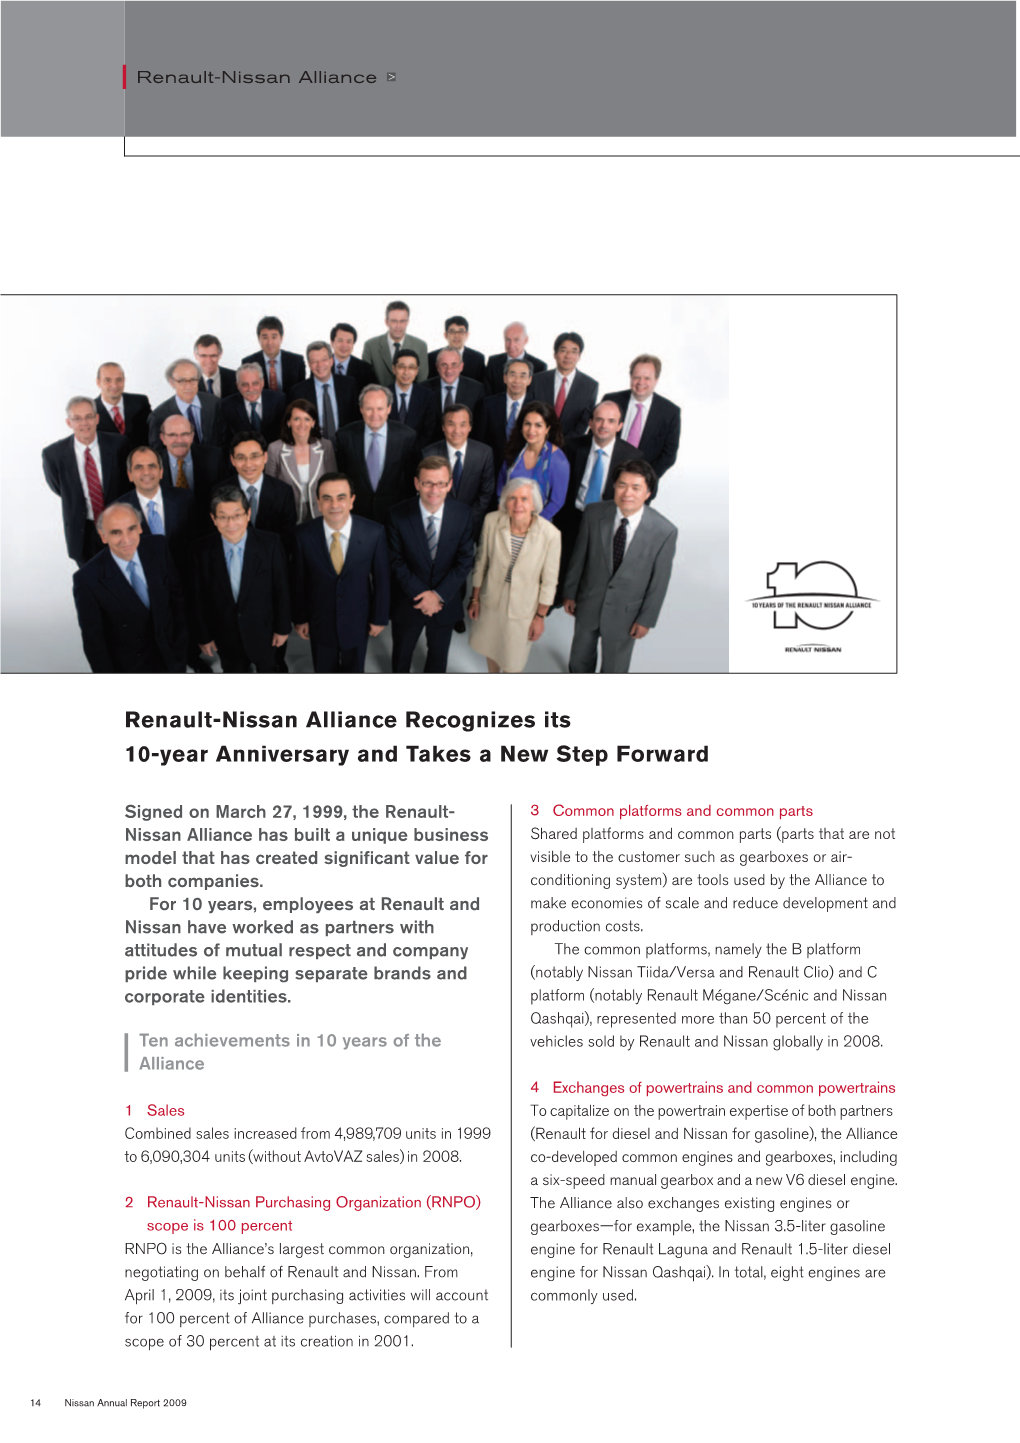 Annual Report 2009 Renault-Nissan Alliance